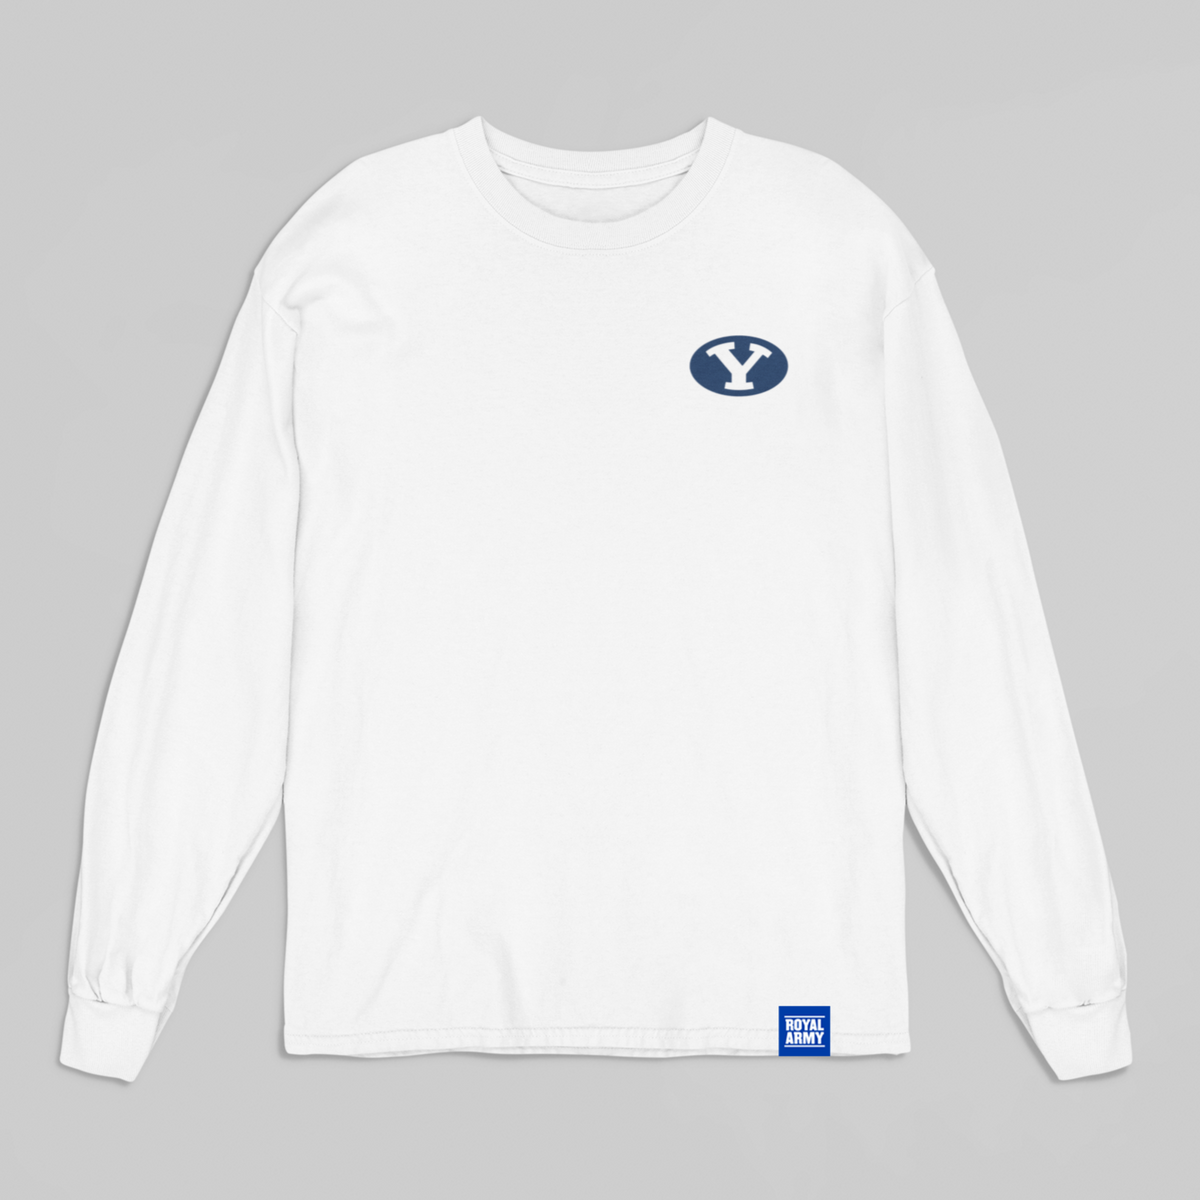 Kids Long-Sleeve White T-Shirt with Navy Stretch Y Patch